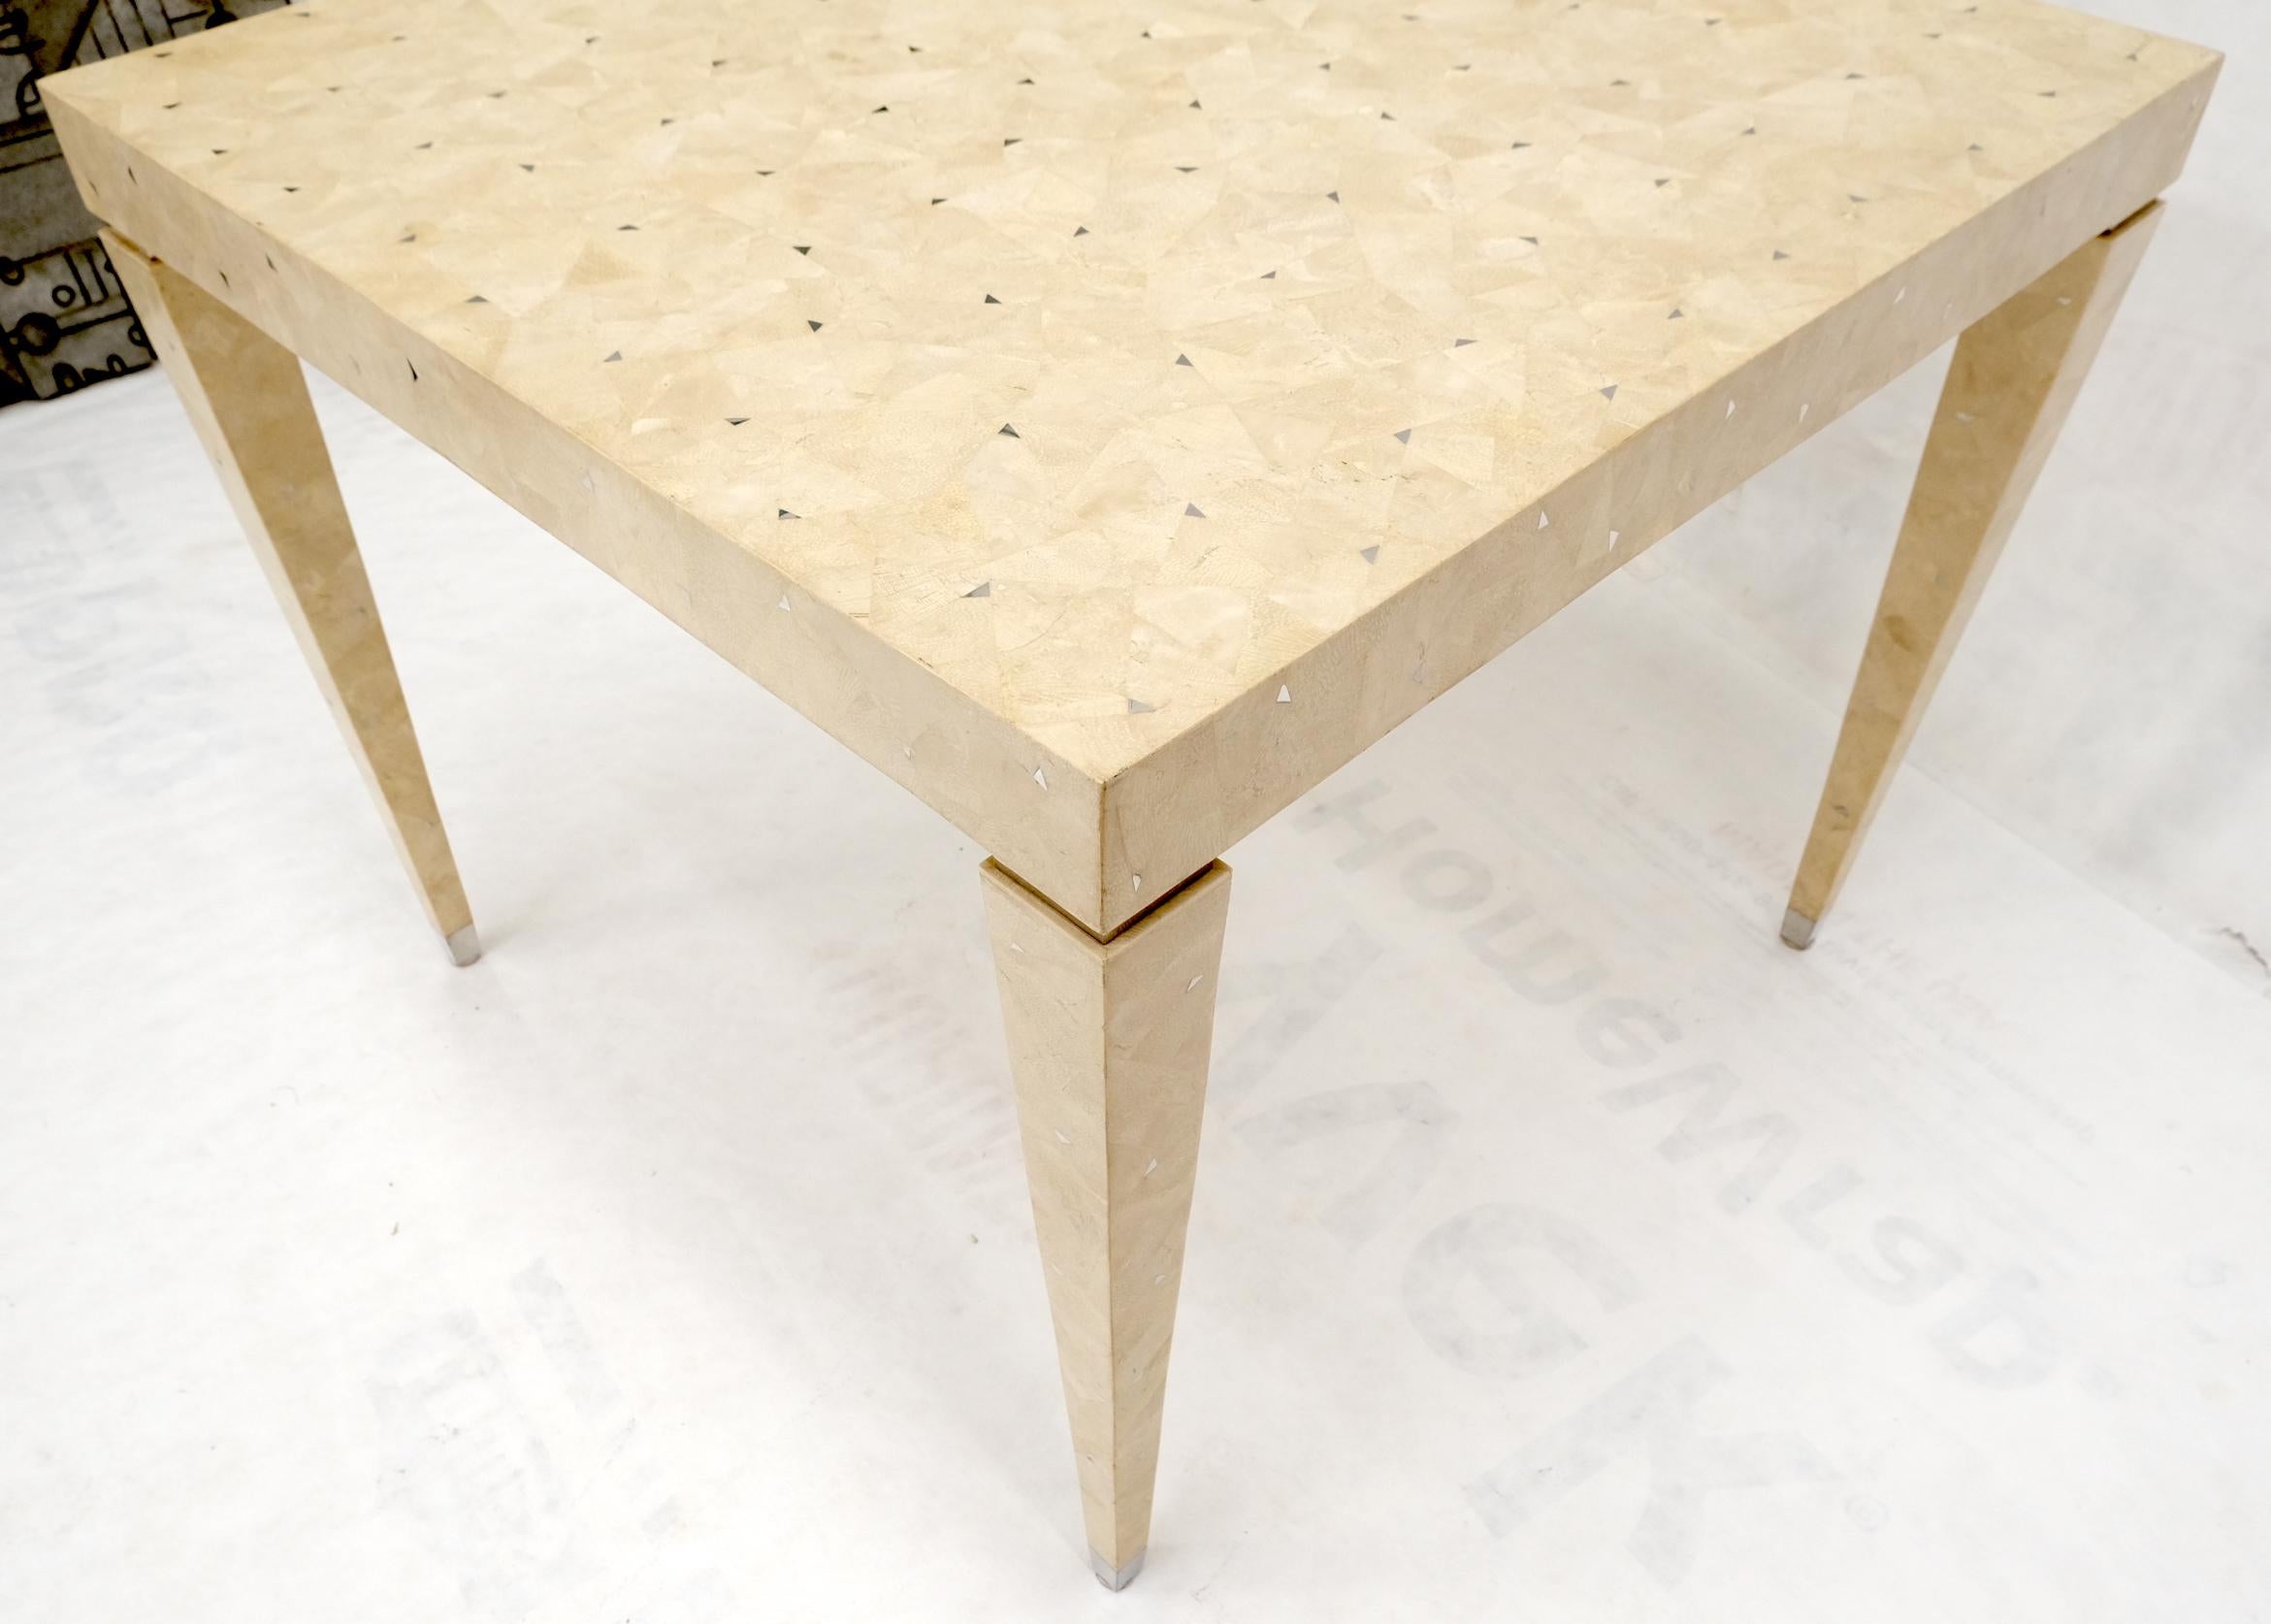 20th Century Tessellated Stone & Mirrors Square Mid-Century Modern Dining Game Table